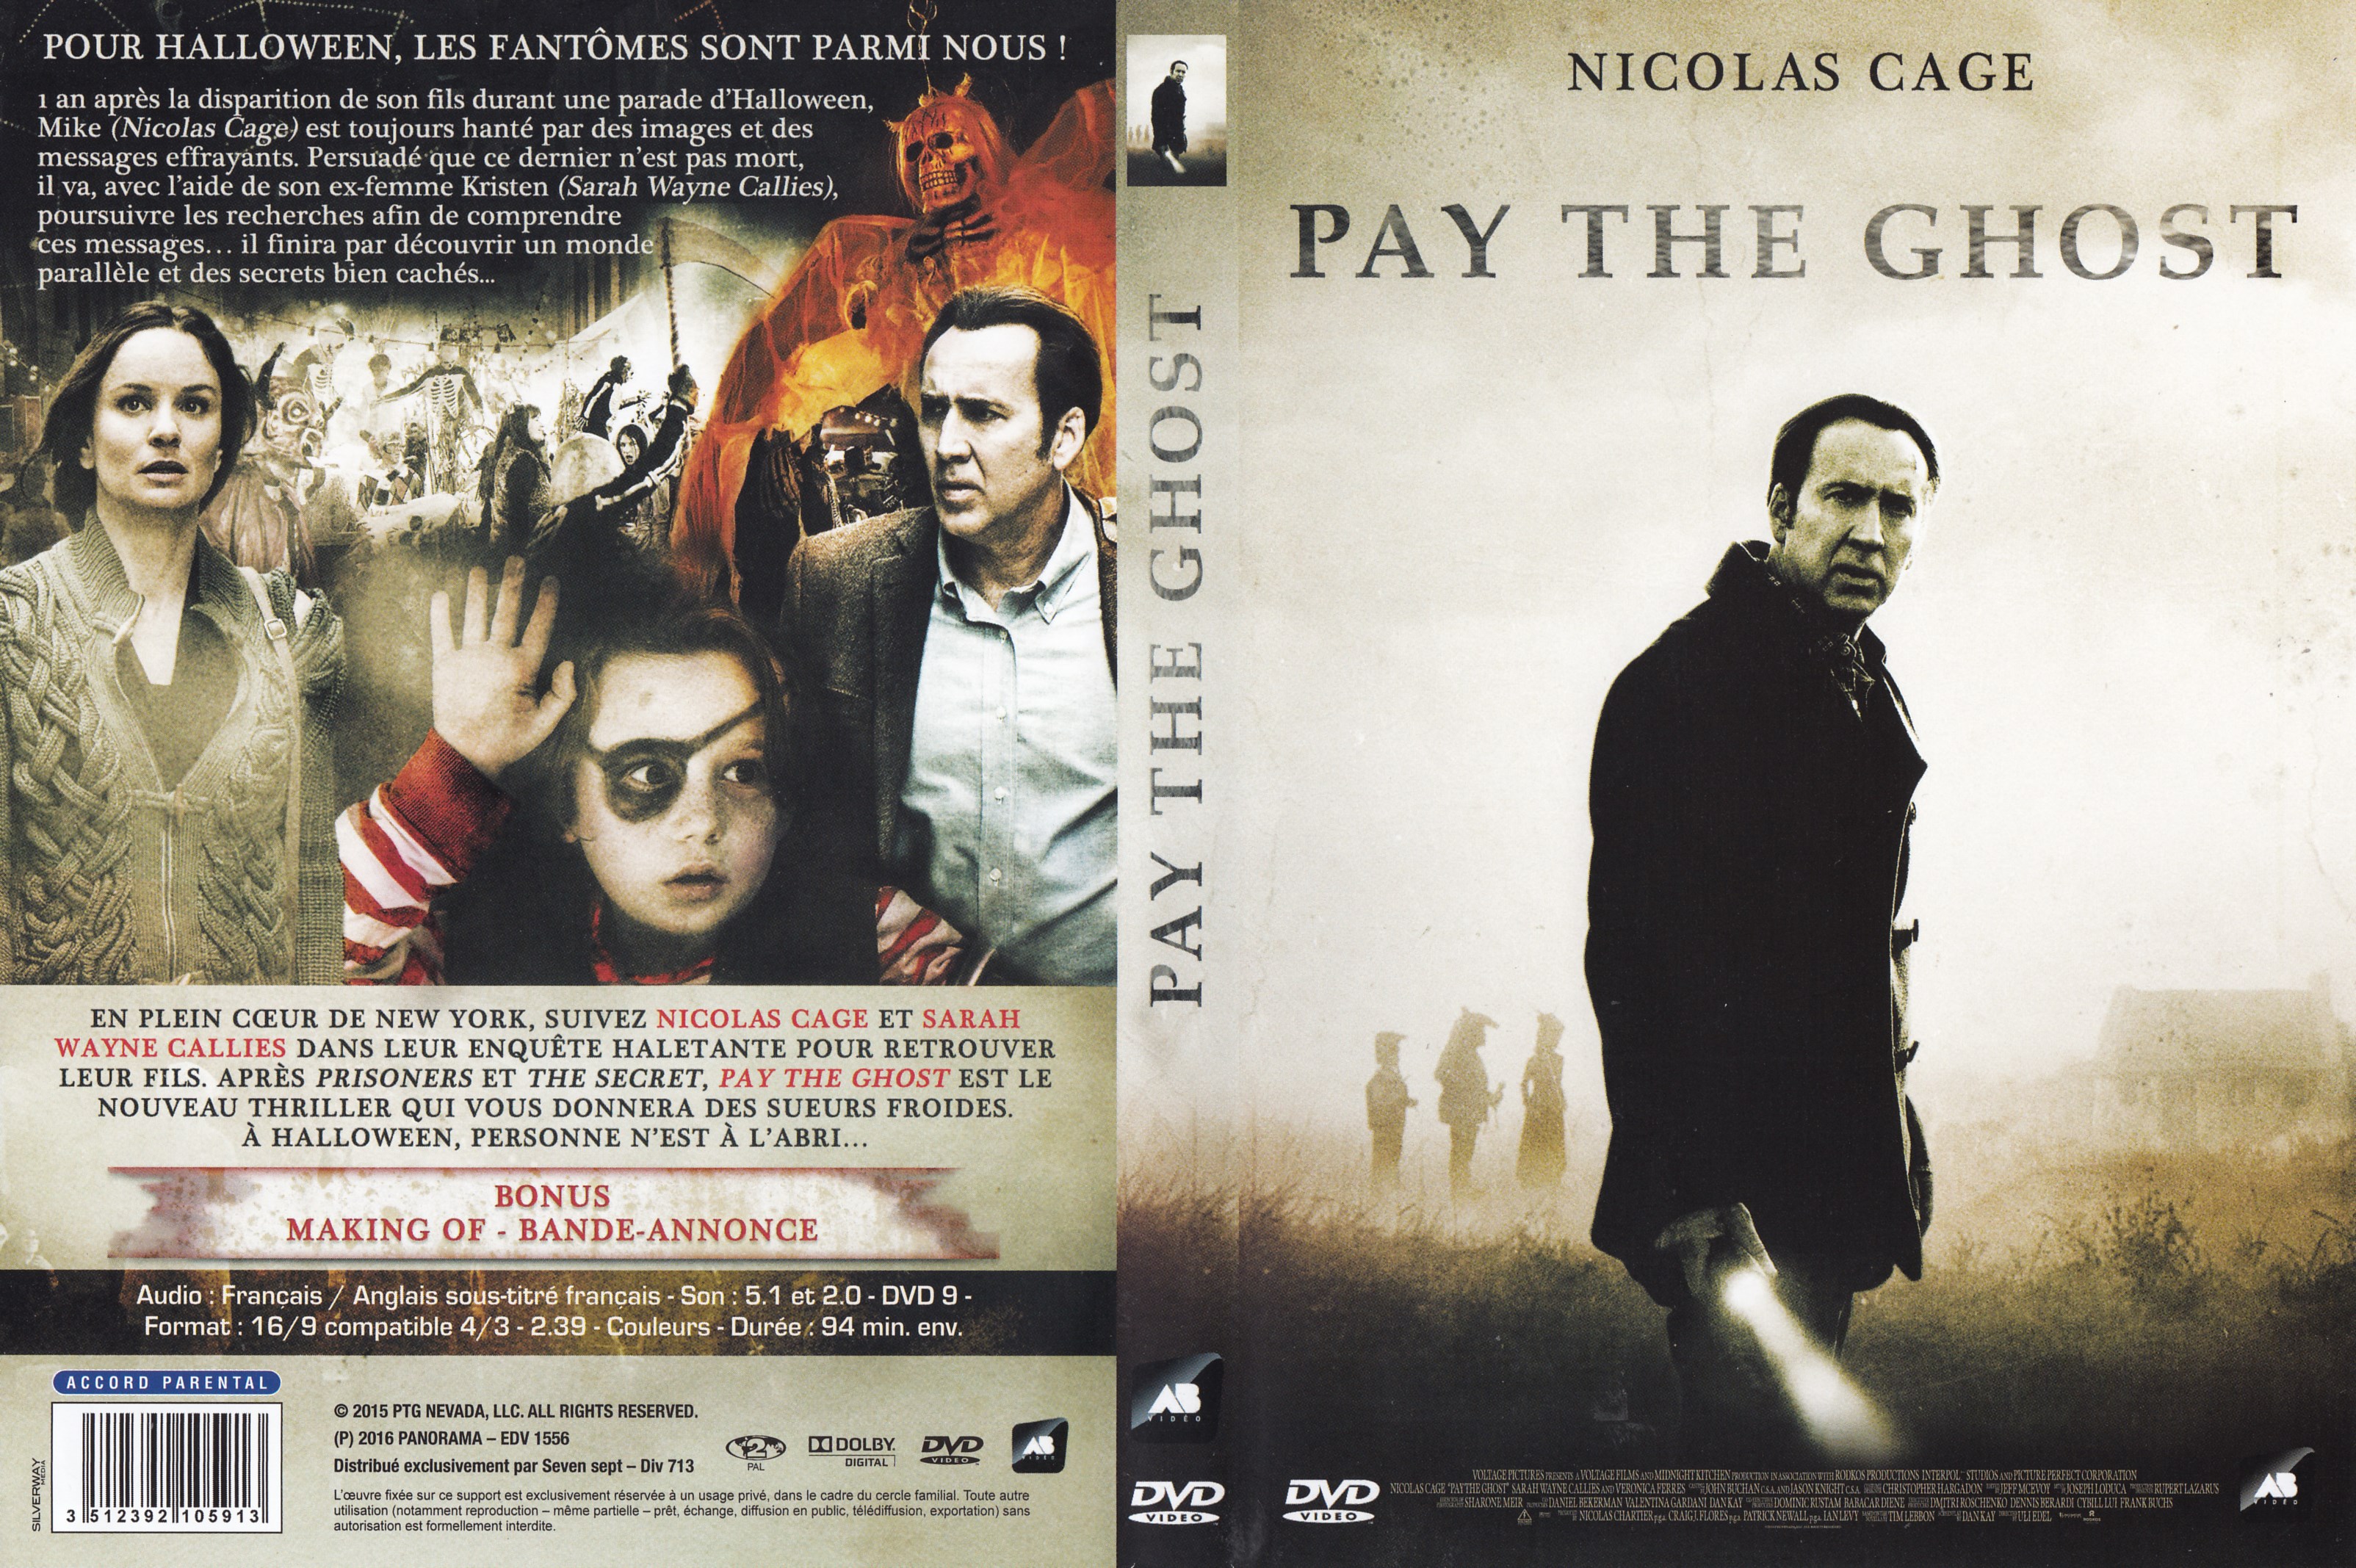 Jaquette DVD Pay the ghost